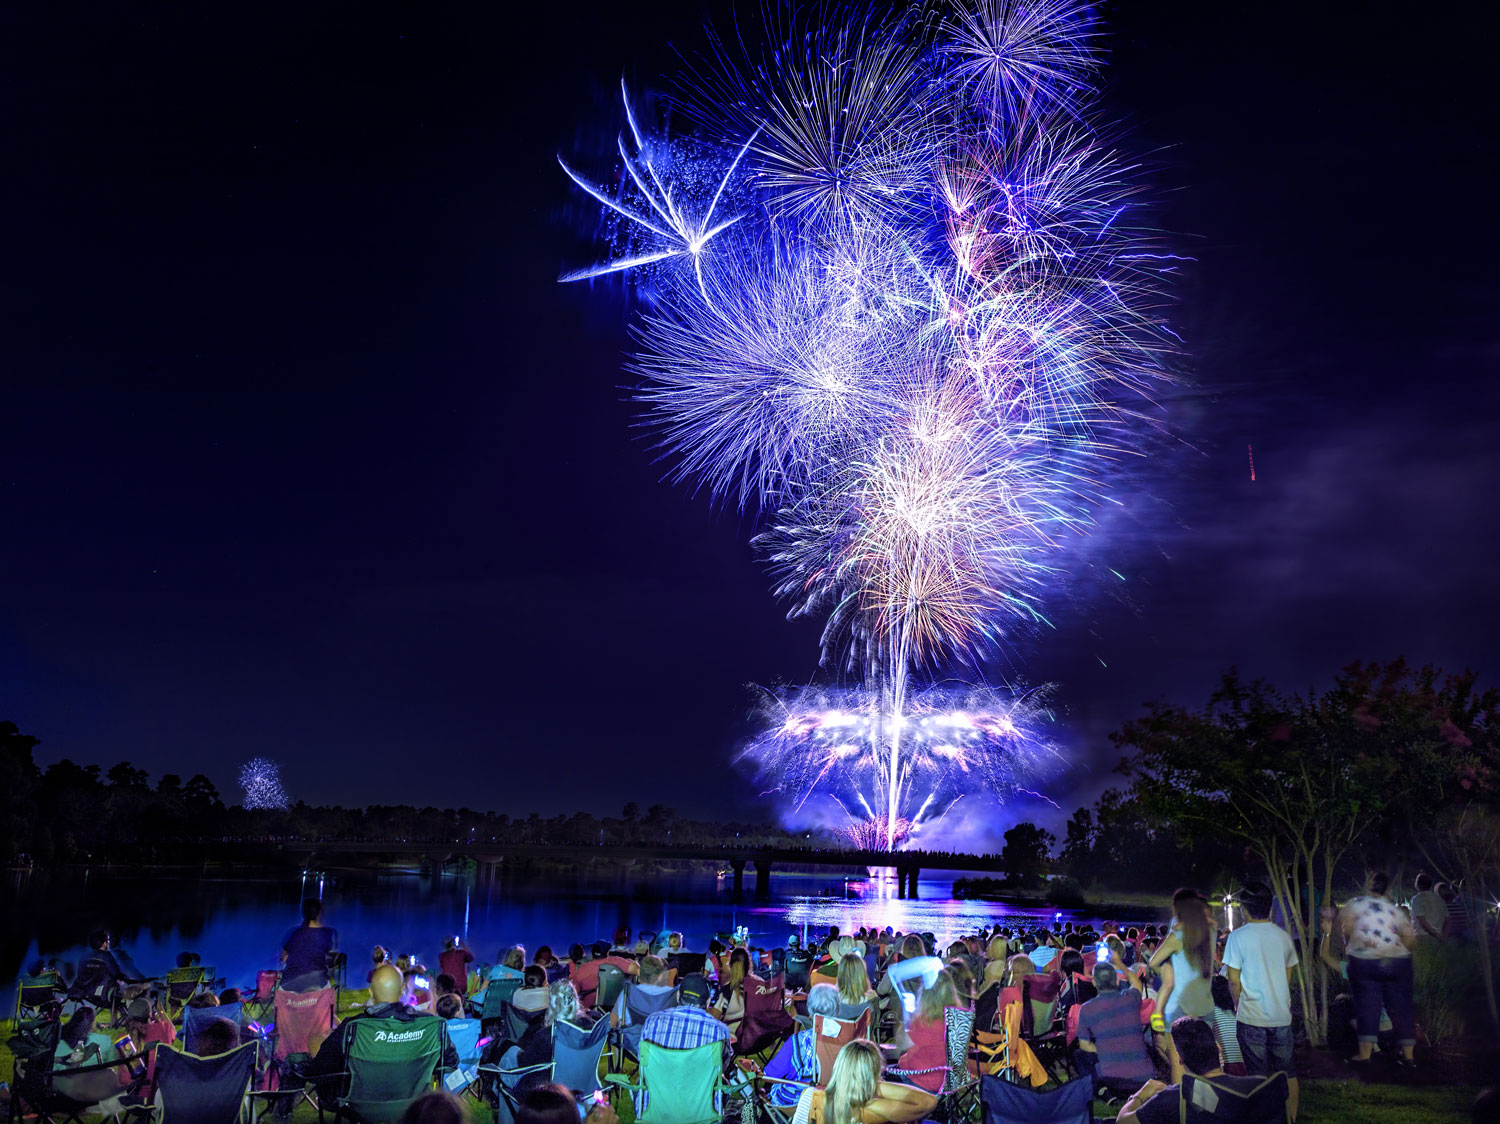 Celebrate the Fourth of July Weekend in The Woodlands The Woodlands